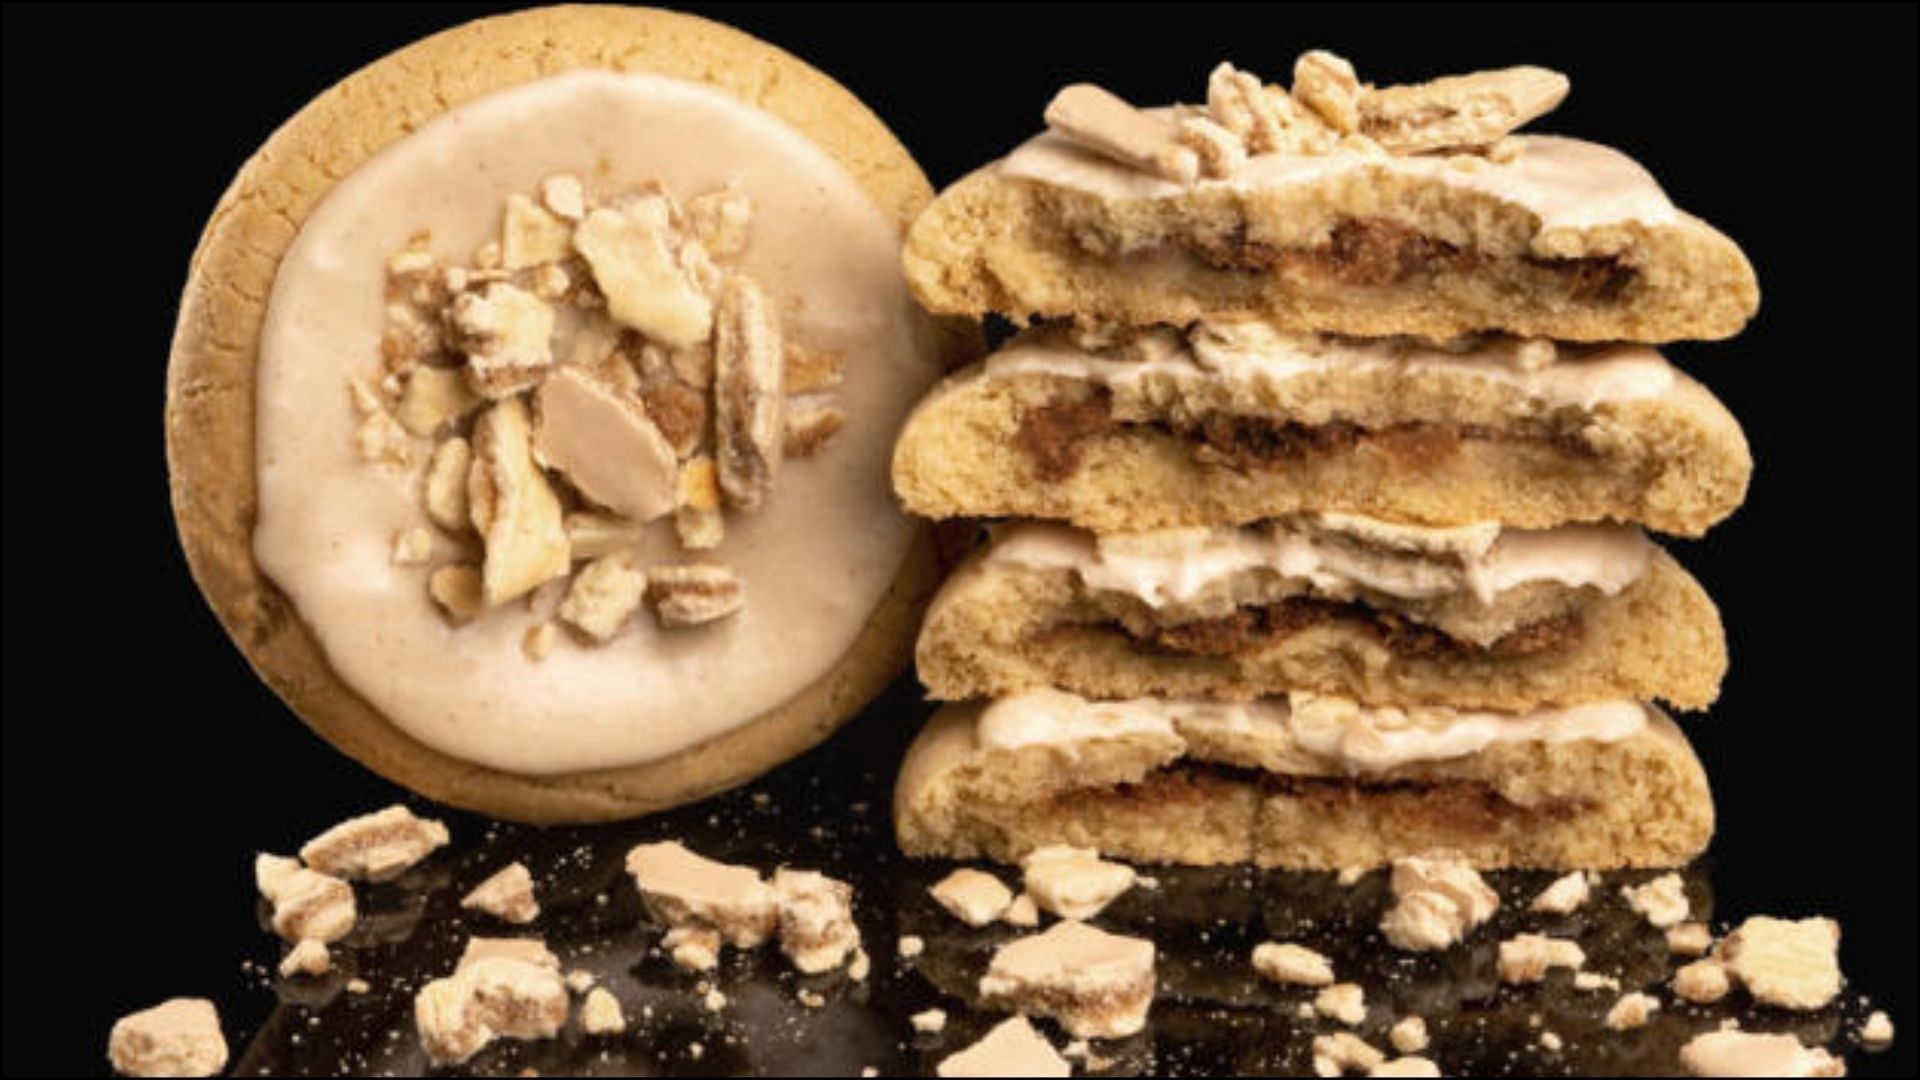 The new Brown Sugar Cinnamon Cookie can be availed for over $4.98 (Image via Crumbl Cookies)